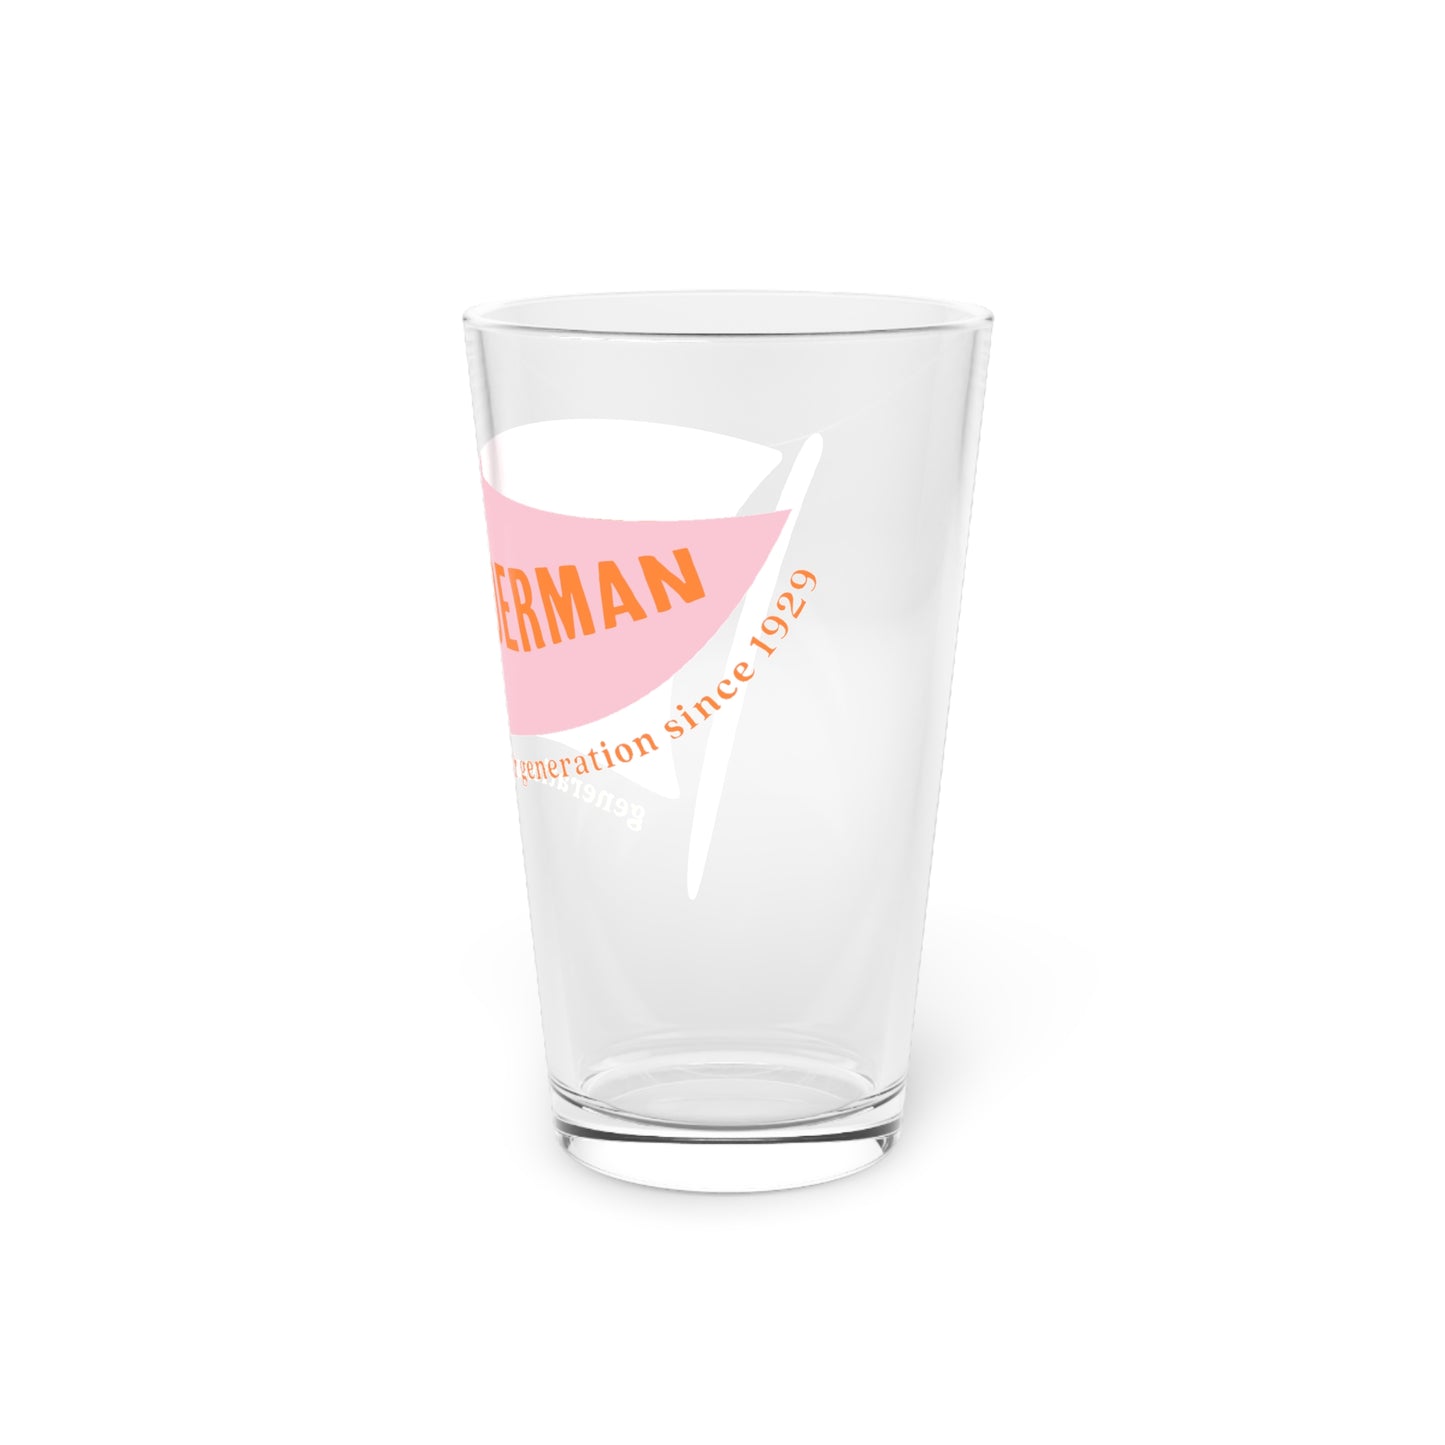 "It's Just for Water from the Spring!" Pint Glass